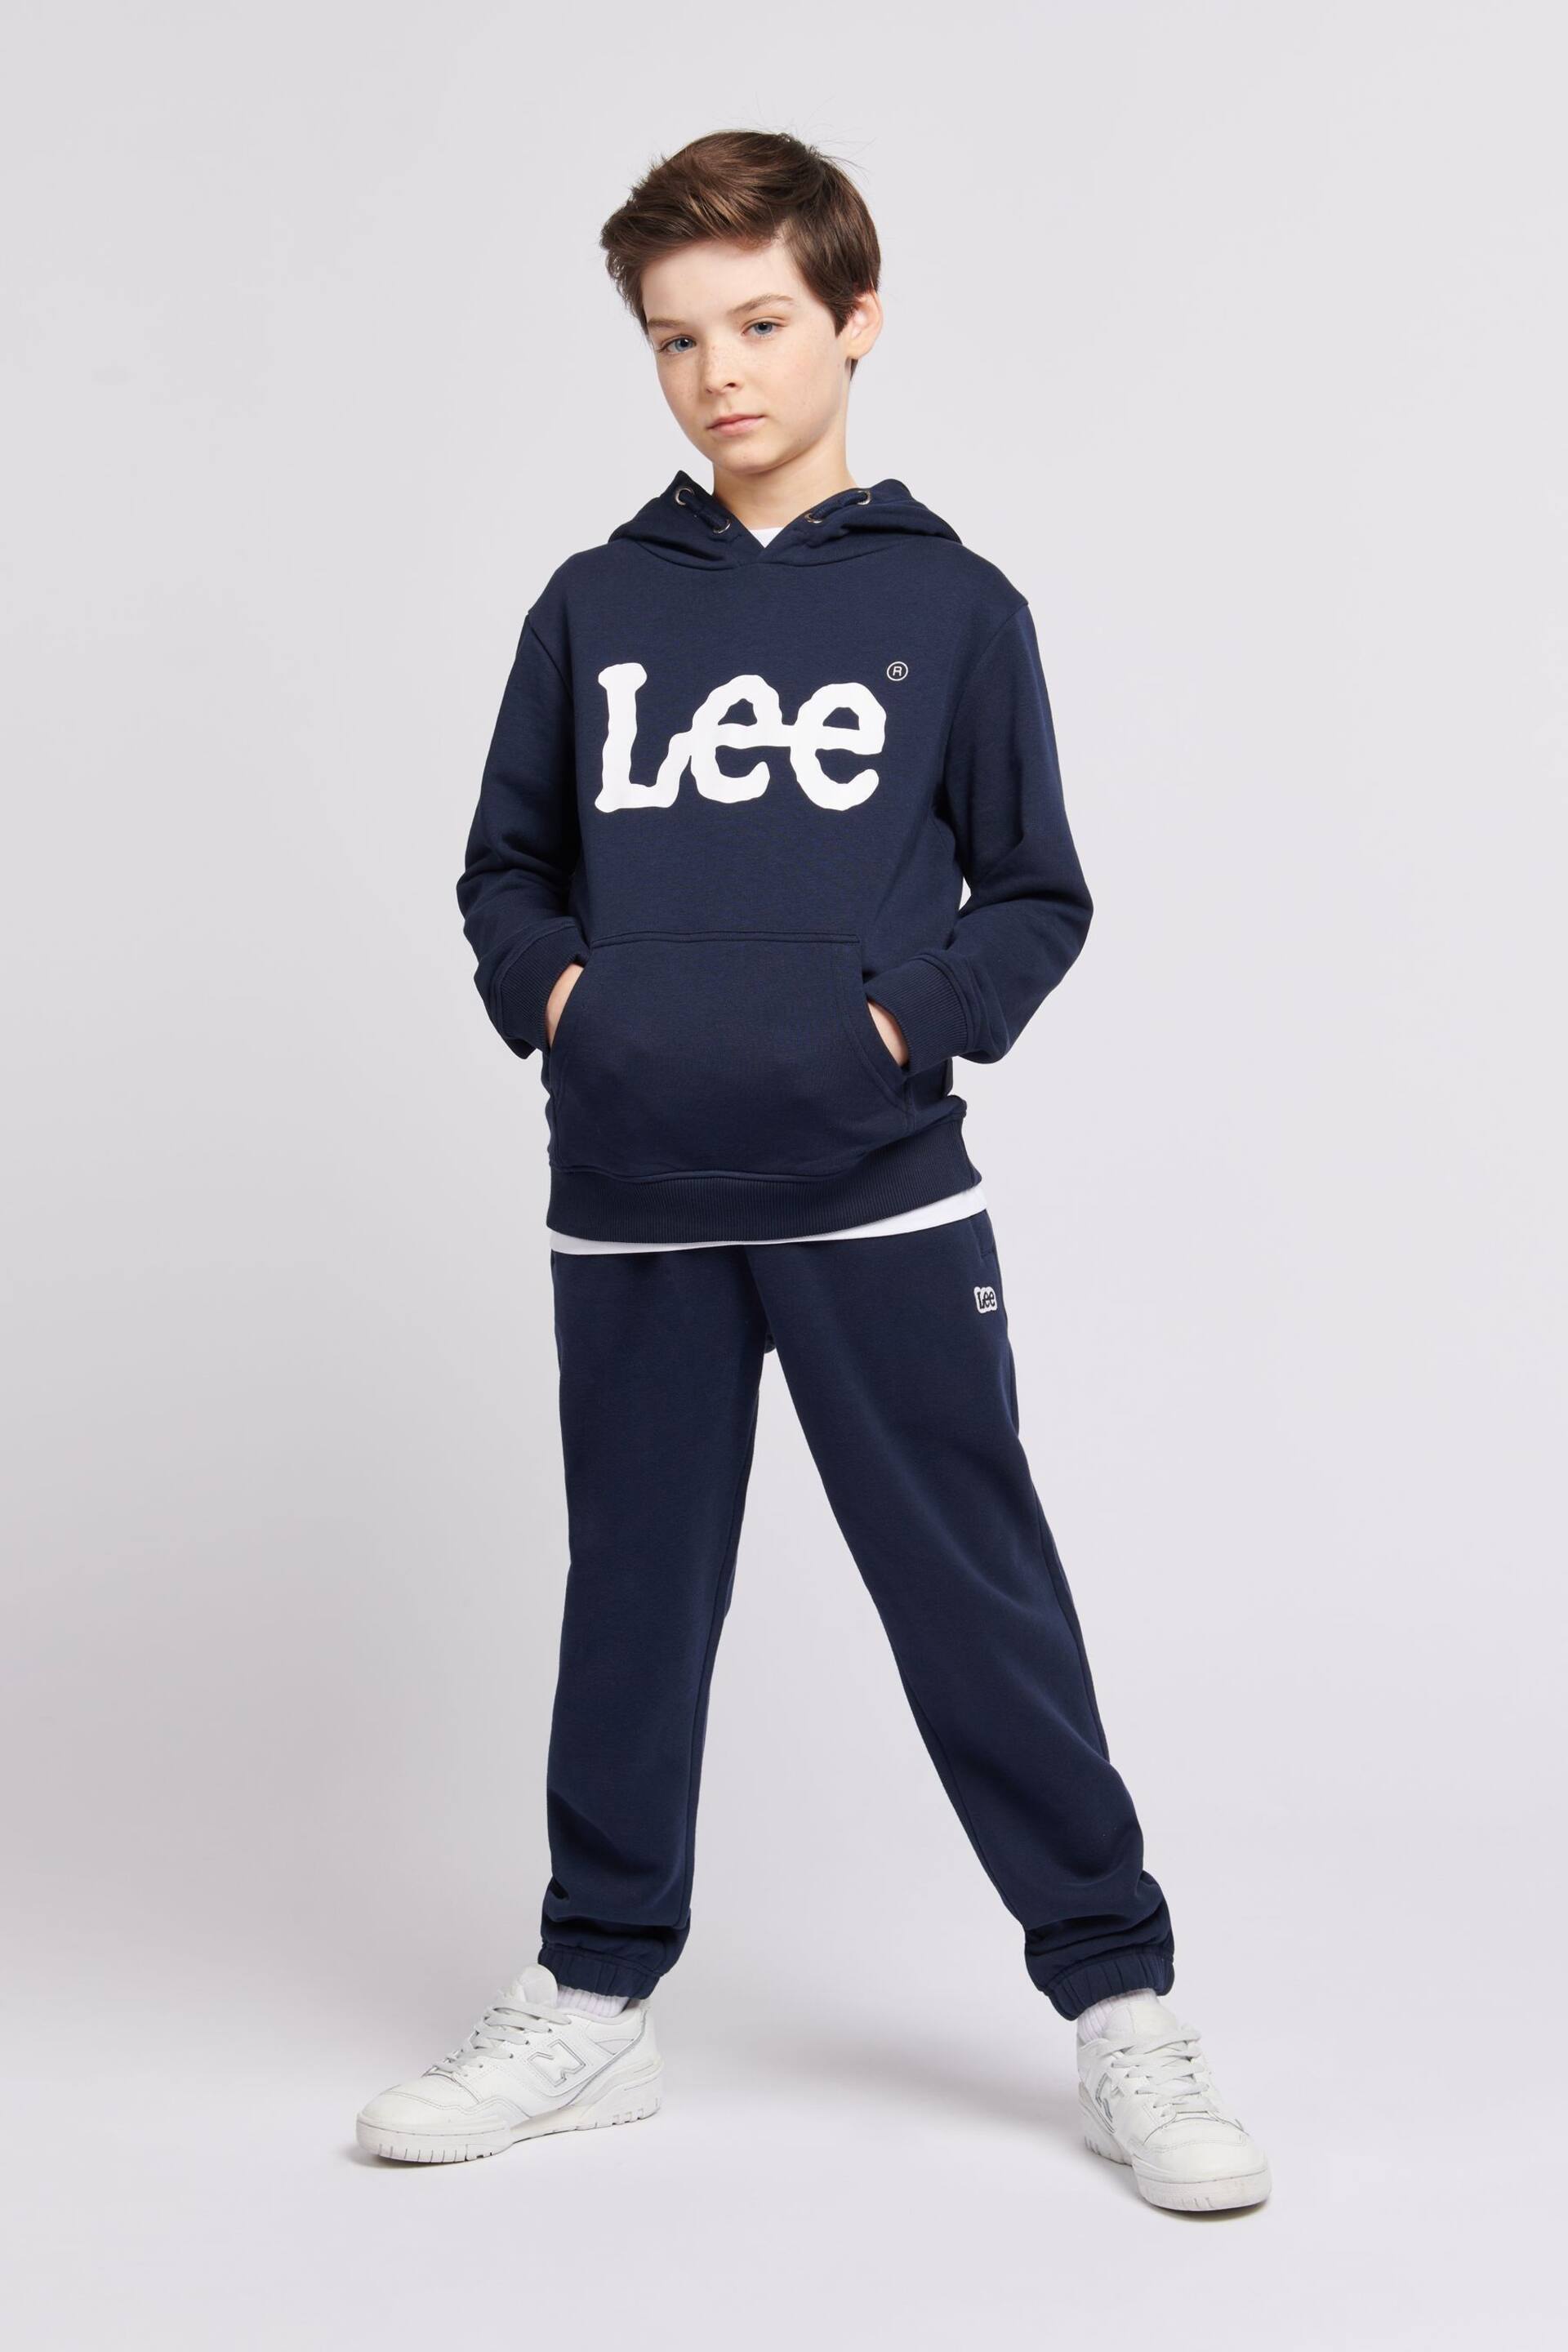 Lee Boys Blue Badge Joggers - Image 4 of 5